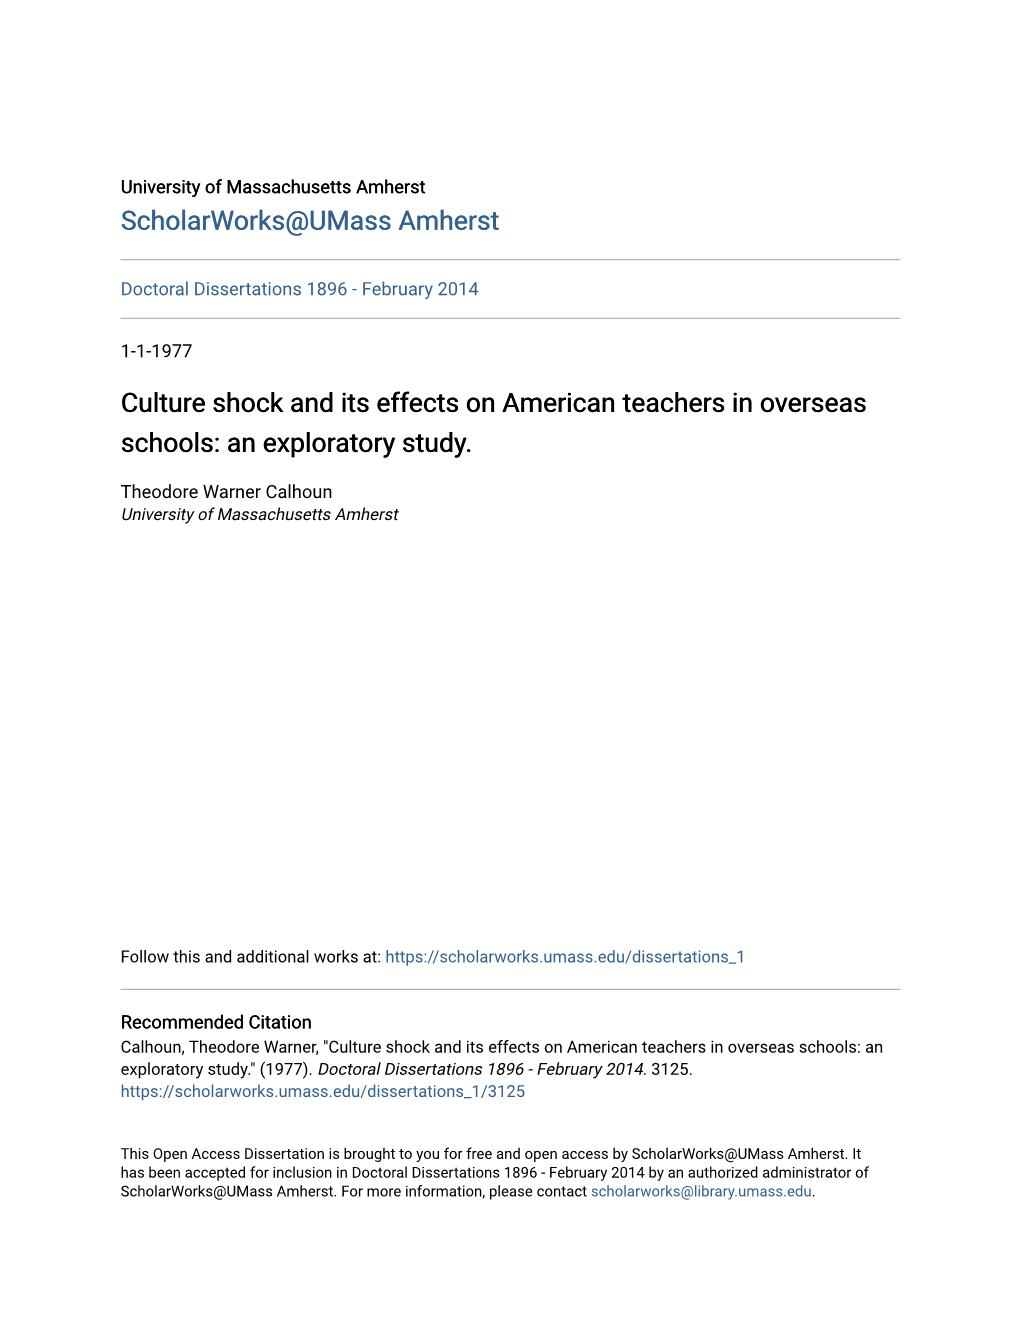 Culture Shock and Its Effects on American Teachers in Overseas Schools: an Exploratory Study